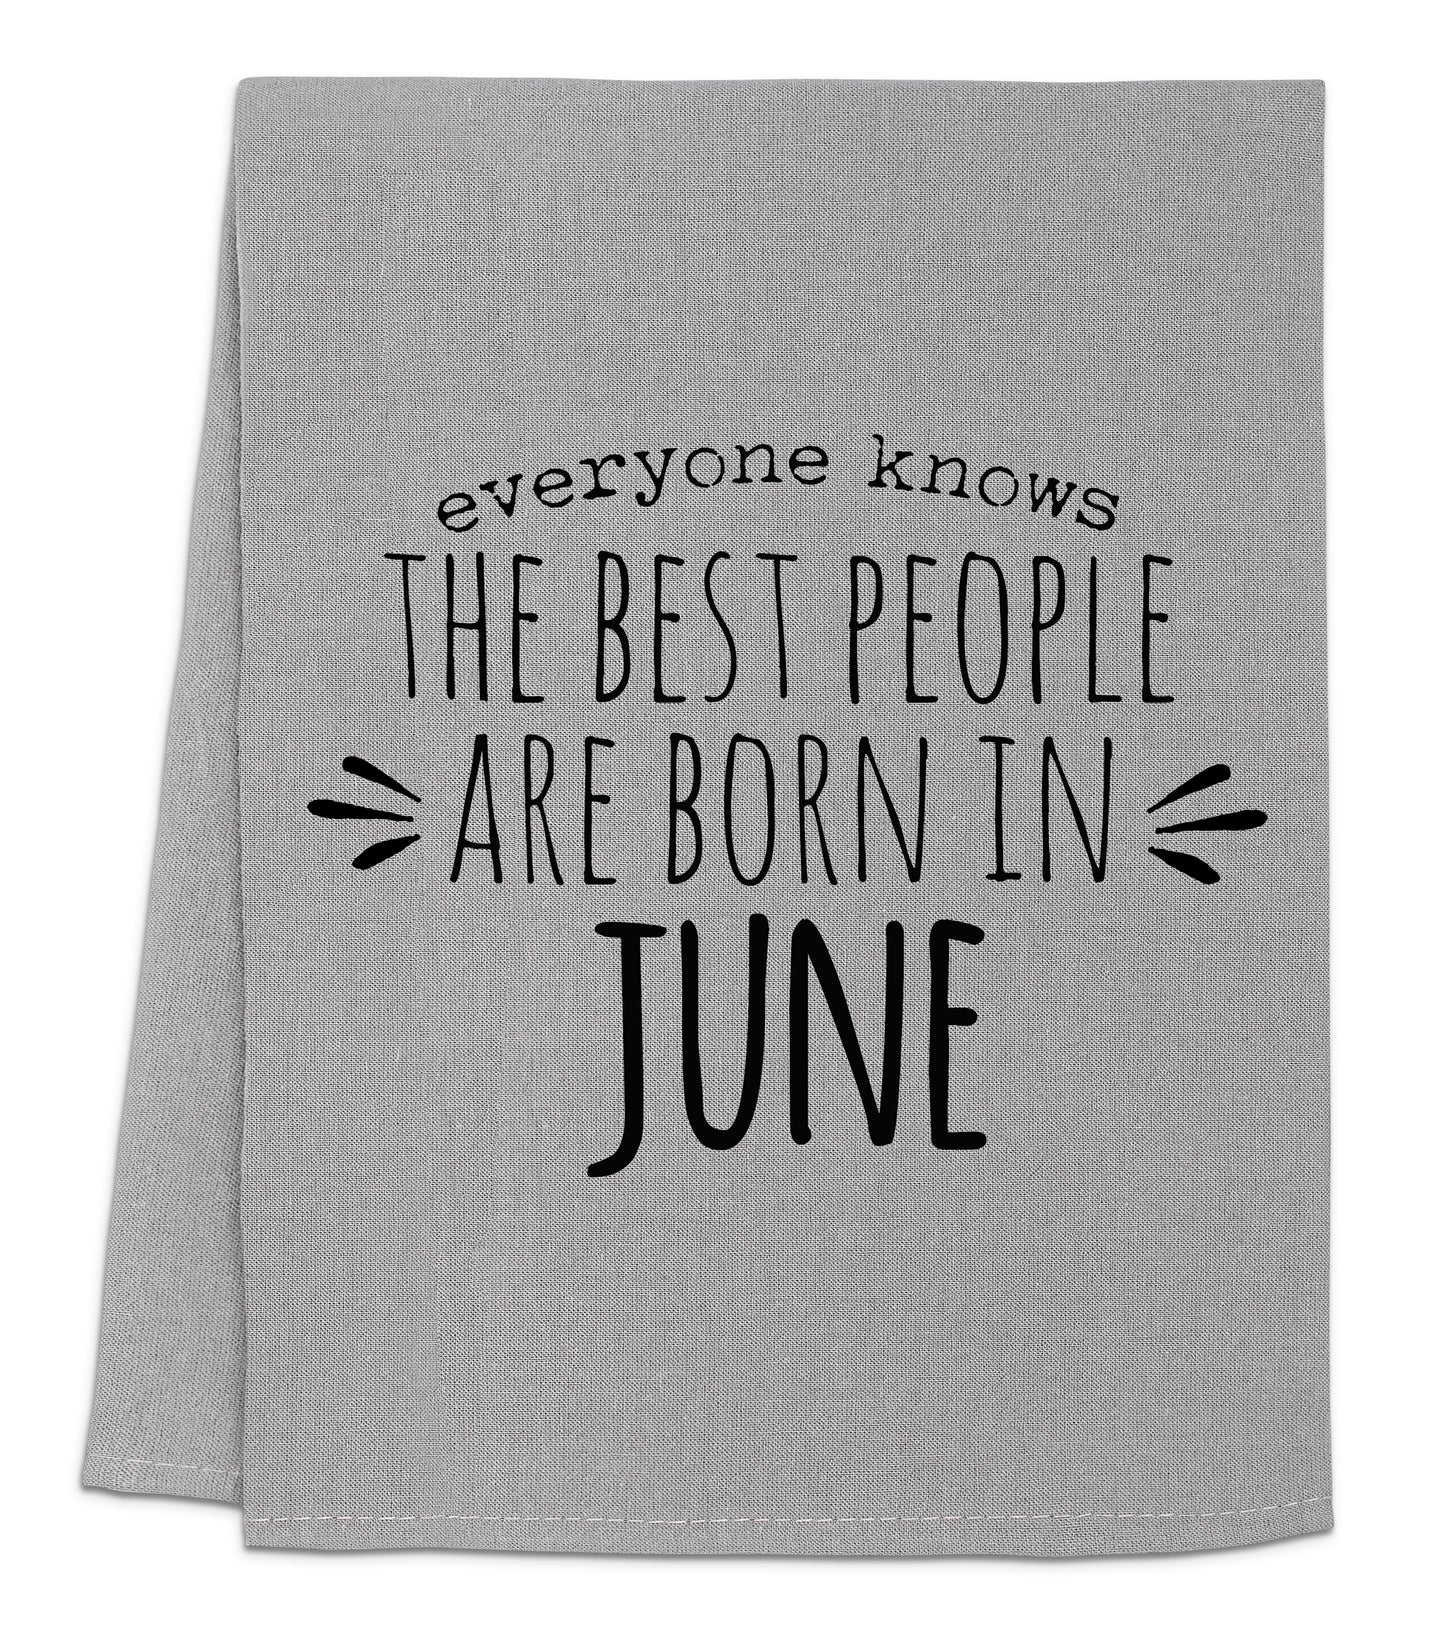 a gray towel with black lettering that says everyone knows the best people are born in